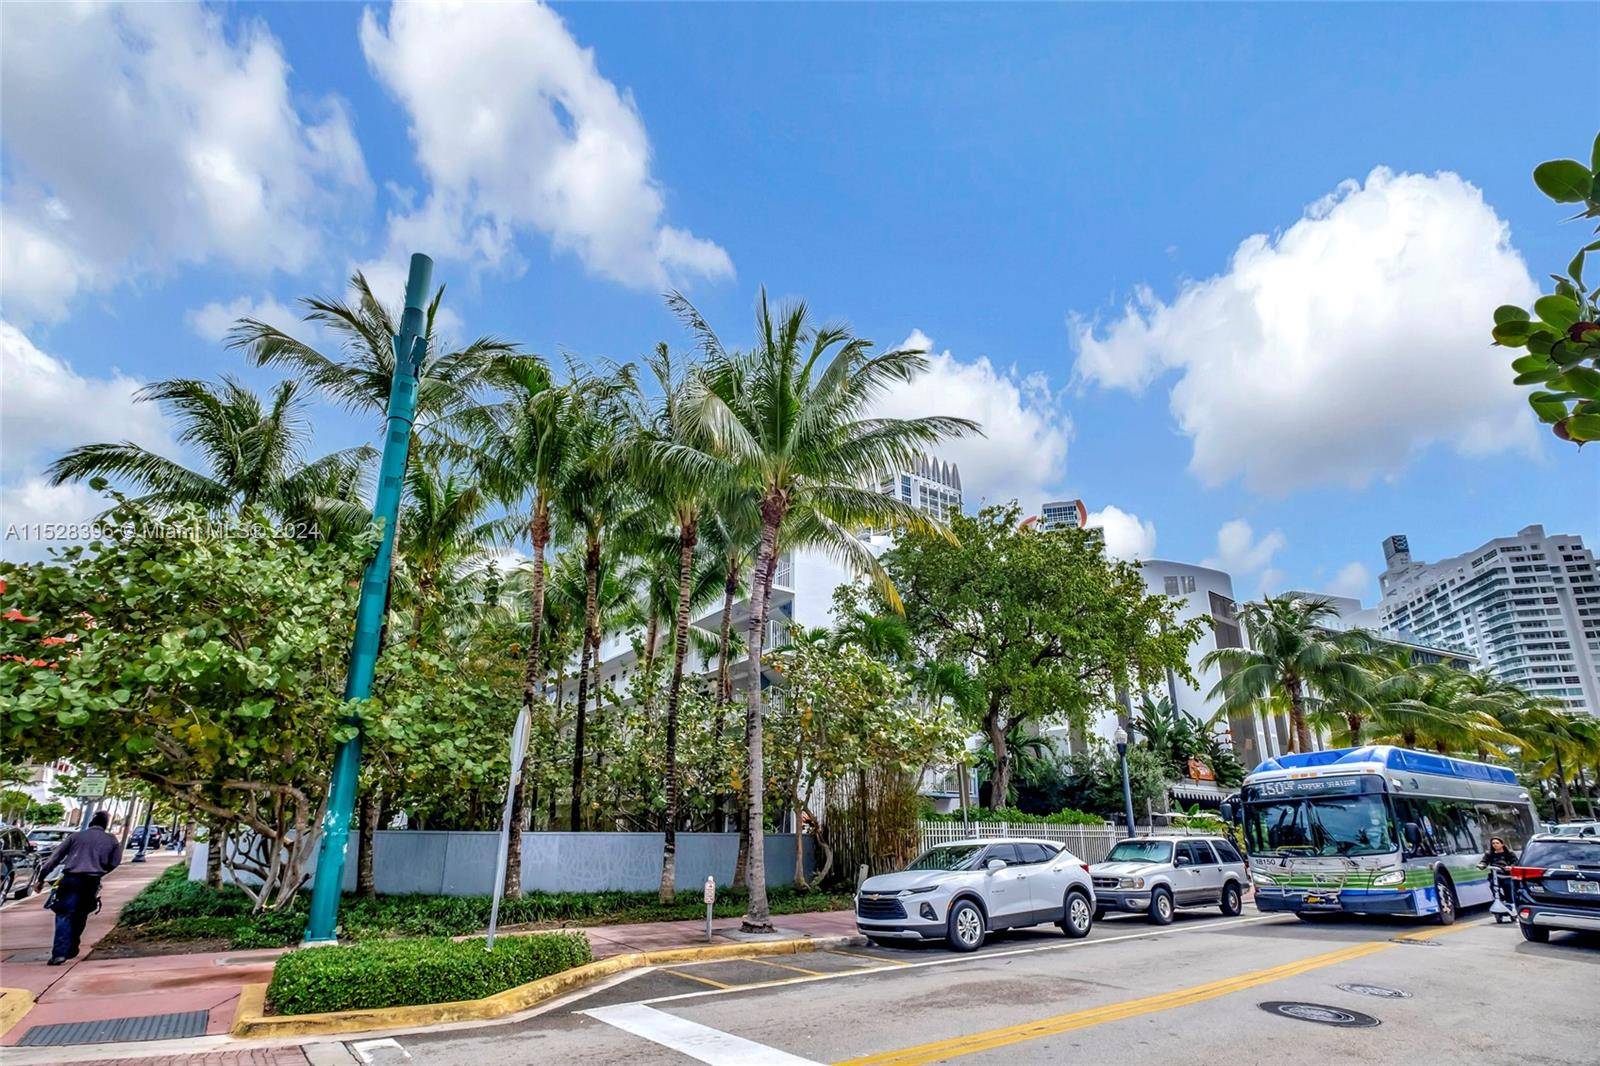 The prime location in South Beach, south of Fifth Sofi 1 block from beach, walk to Joe s Stone Crab, Smith Wollensky, Nikki Beach, surrounded by Multi million condos.